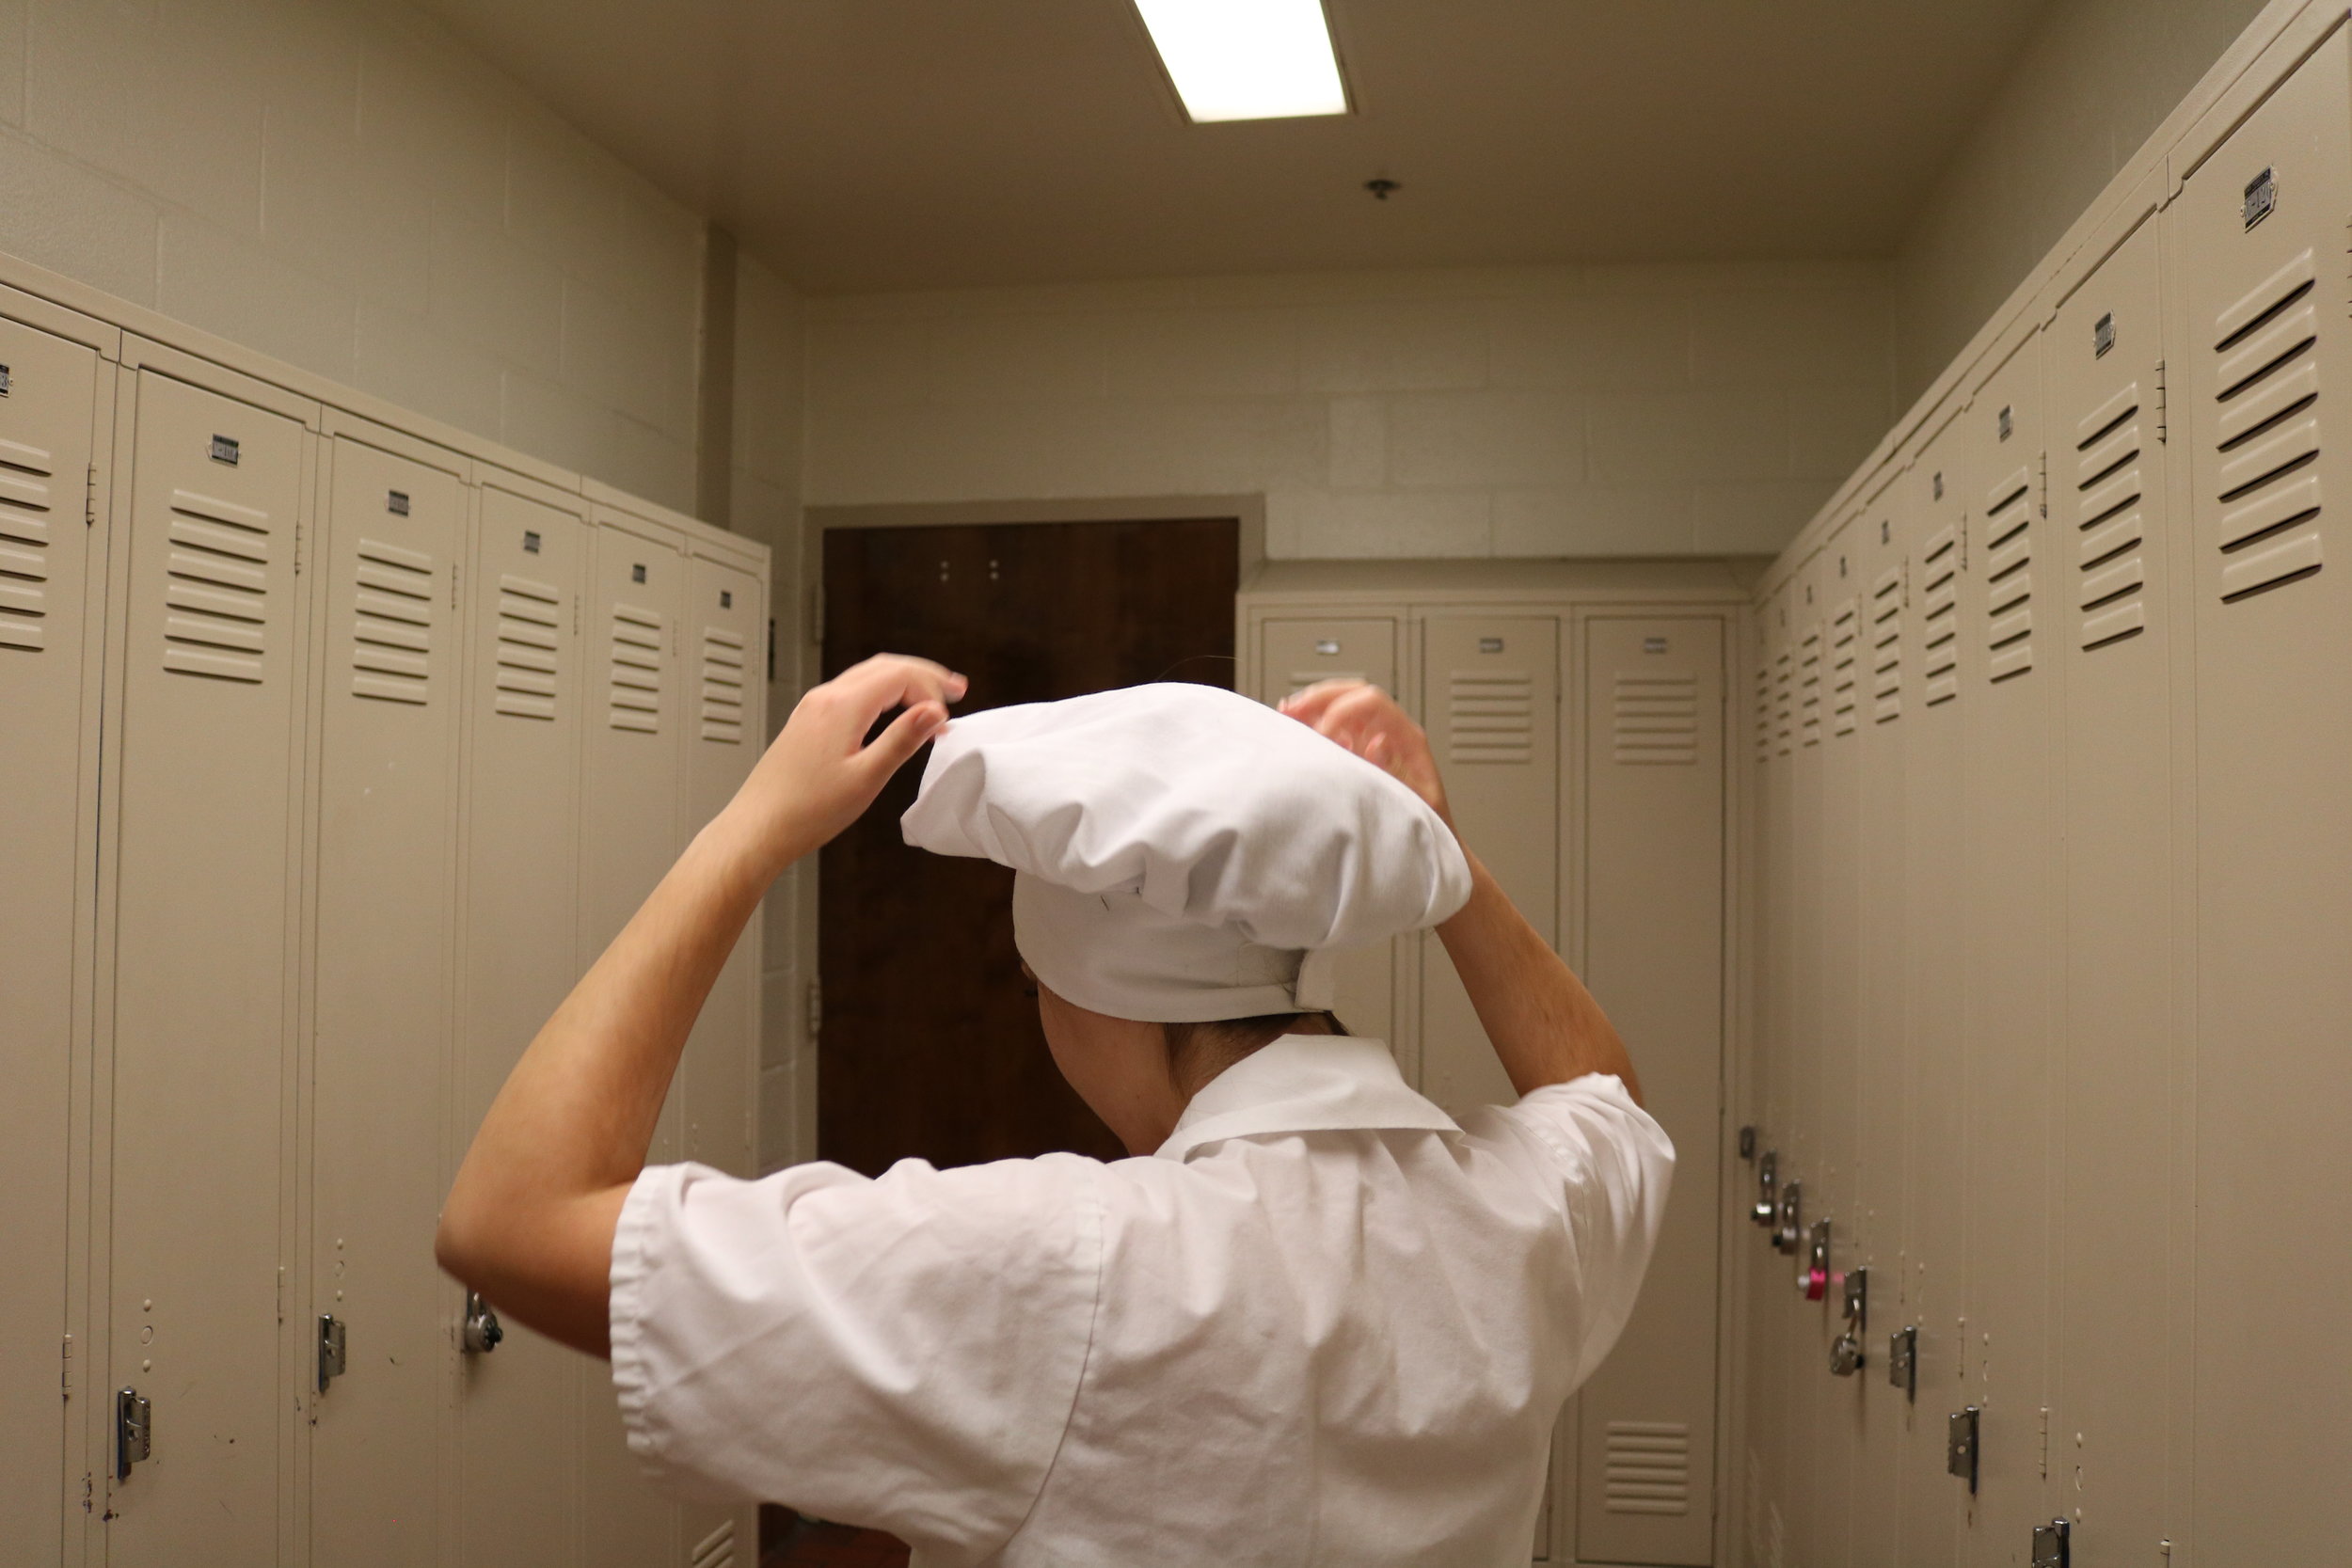   Ally Berrich, 17, removes her chef’s hat and prepares to go home after her baking and pastry class at the Center of Applied Technology North in Severn, Md., on May 11, 2016  